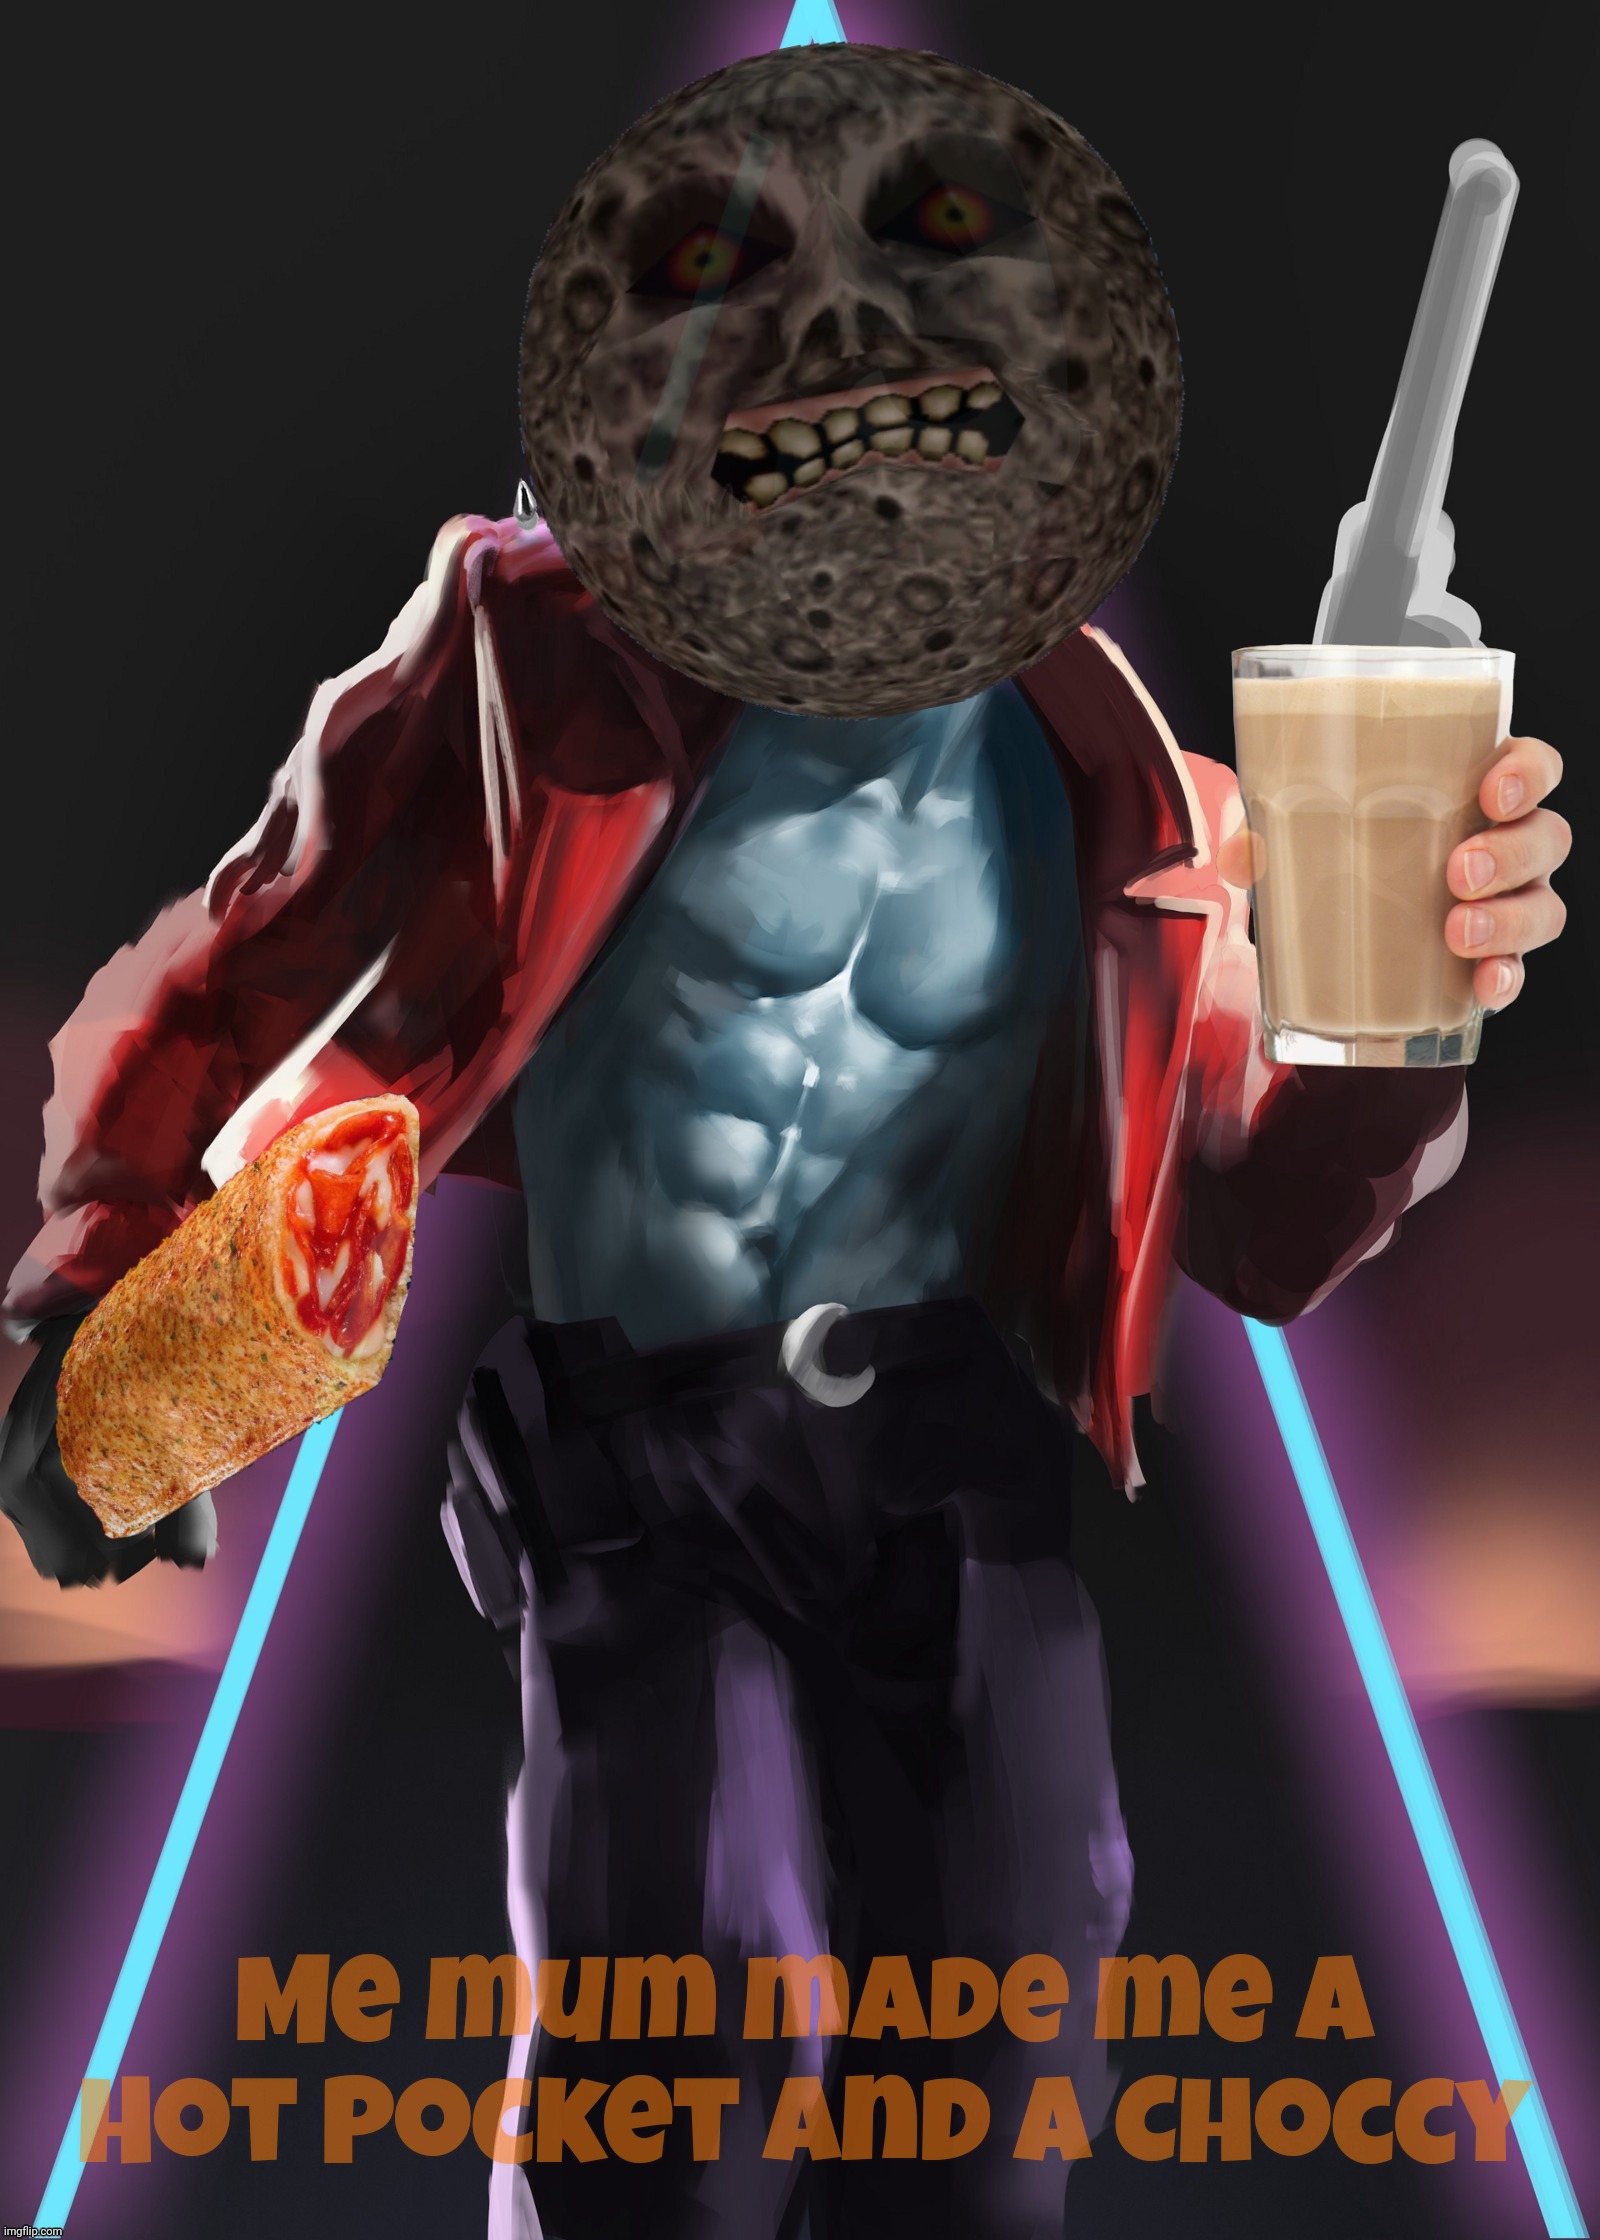 Give me all your choccy, all your nuked Hot Pockets too | Me mum made me a Hot Pocket and a Choccy | image tagged in moon man,moonie,mummzie,me mum,choccy milk,pronounced loneliness | made w/ Imgflip meme maker